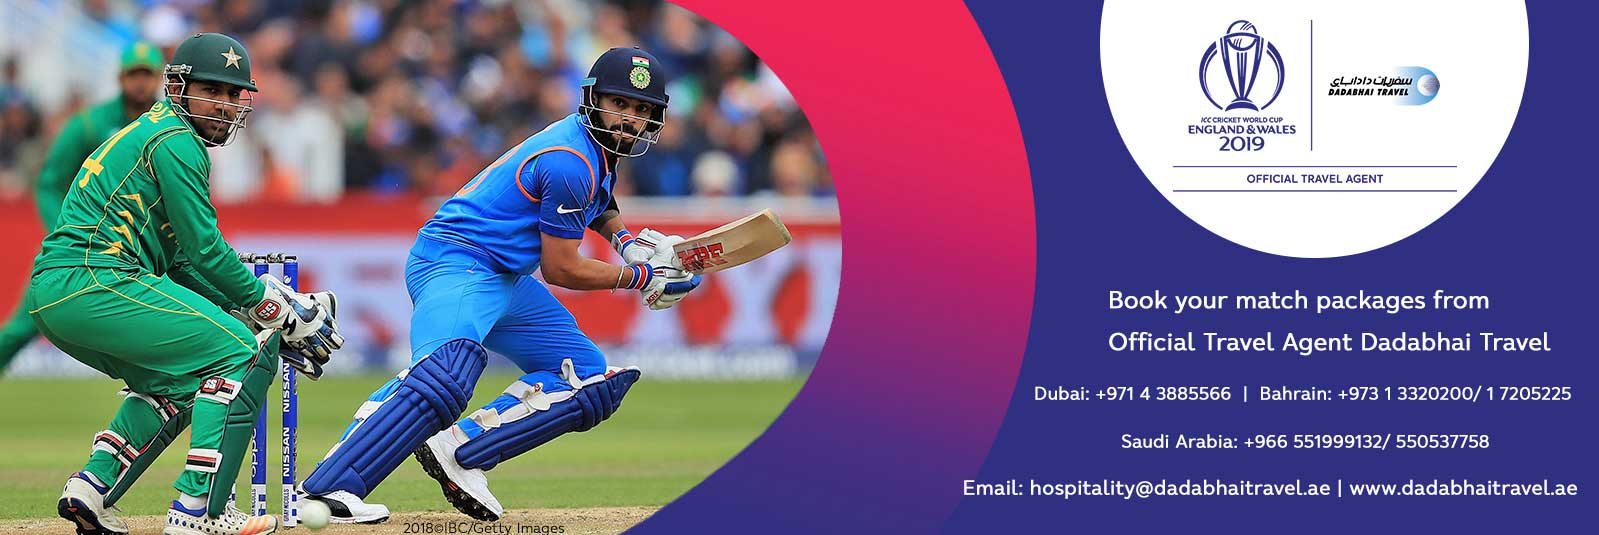 ICC Cricket World Cup 2019 Ticket and Travel Package